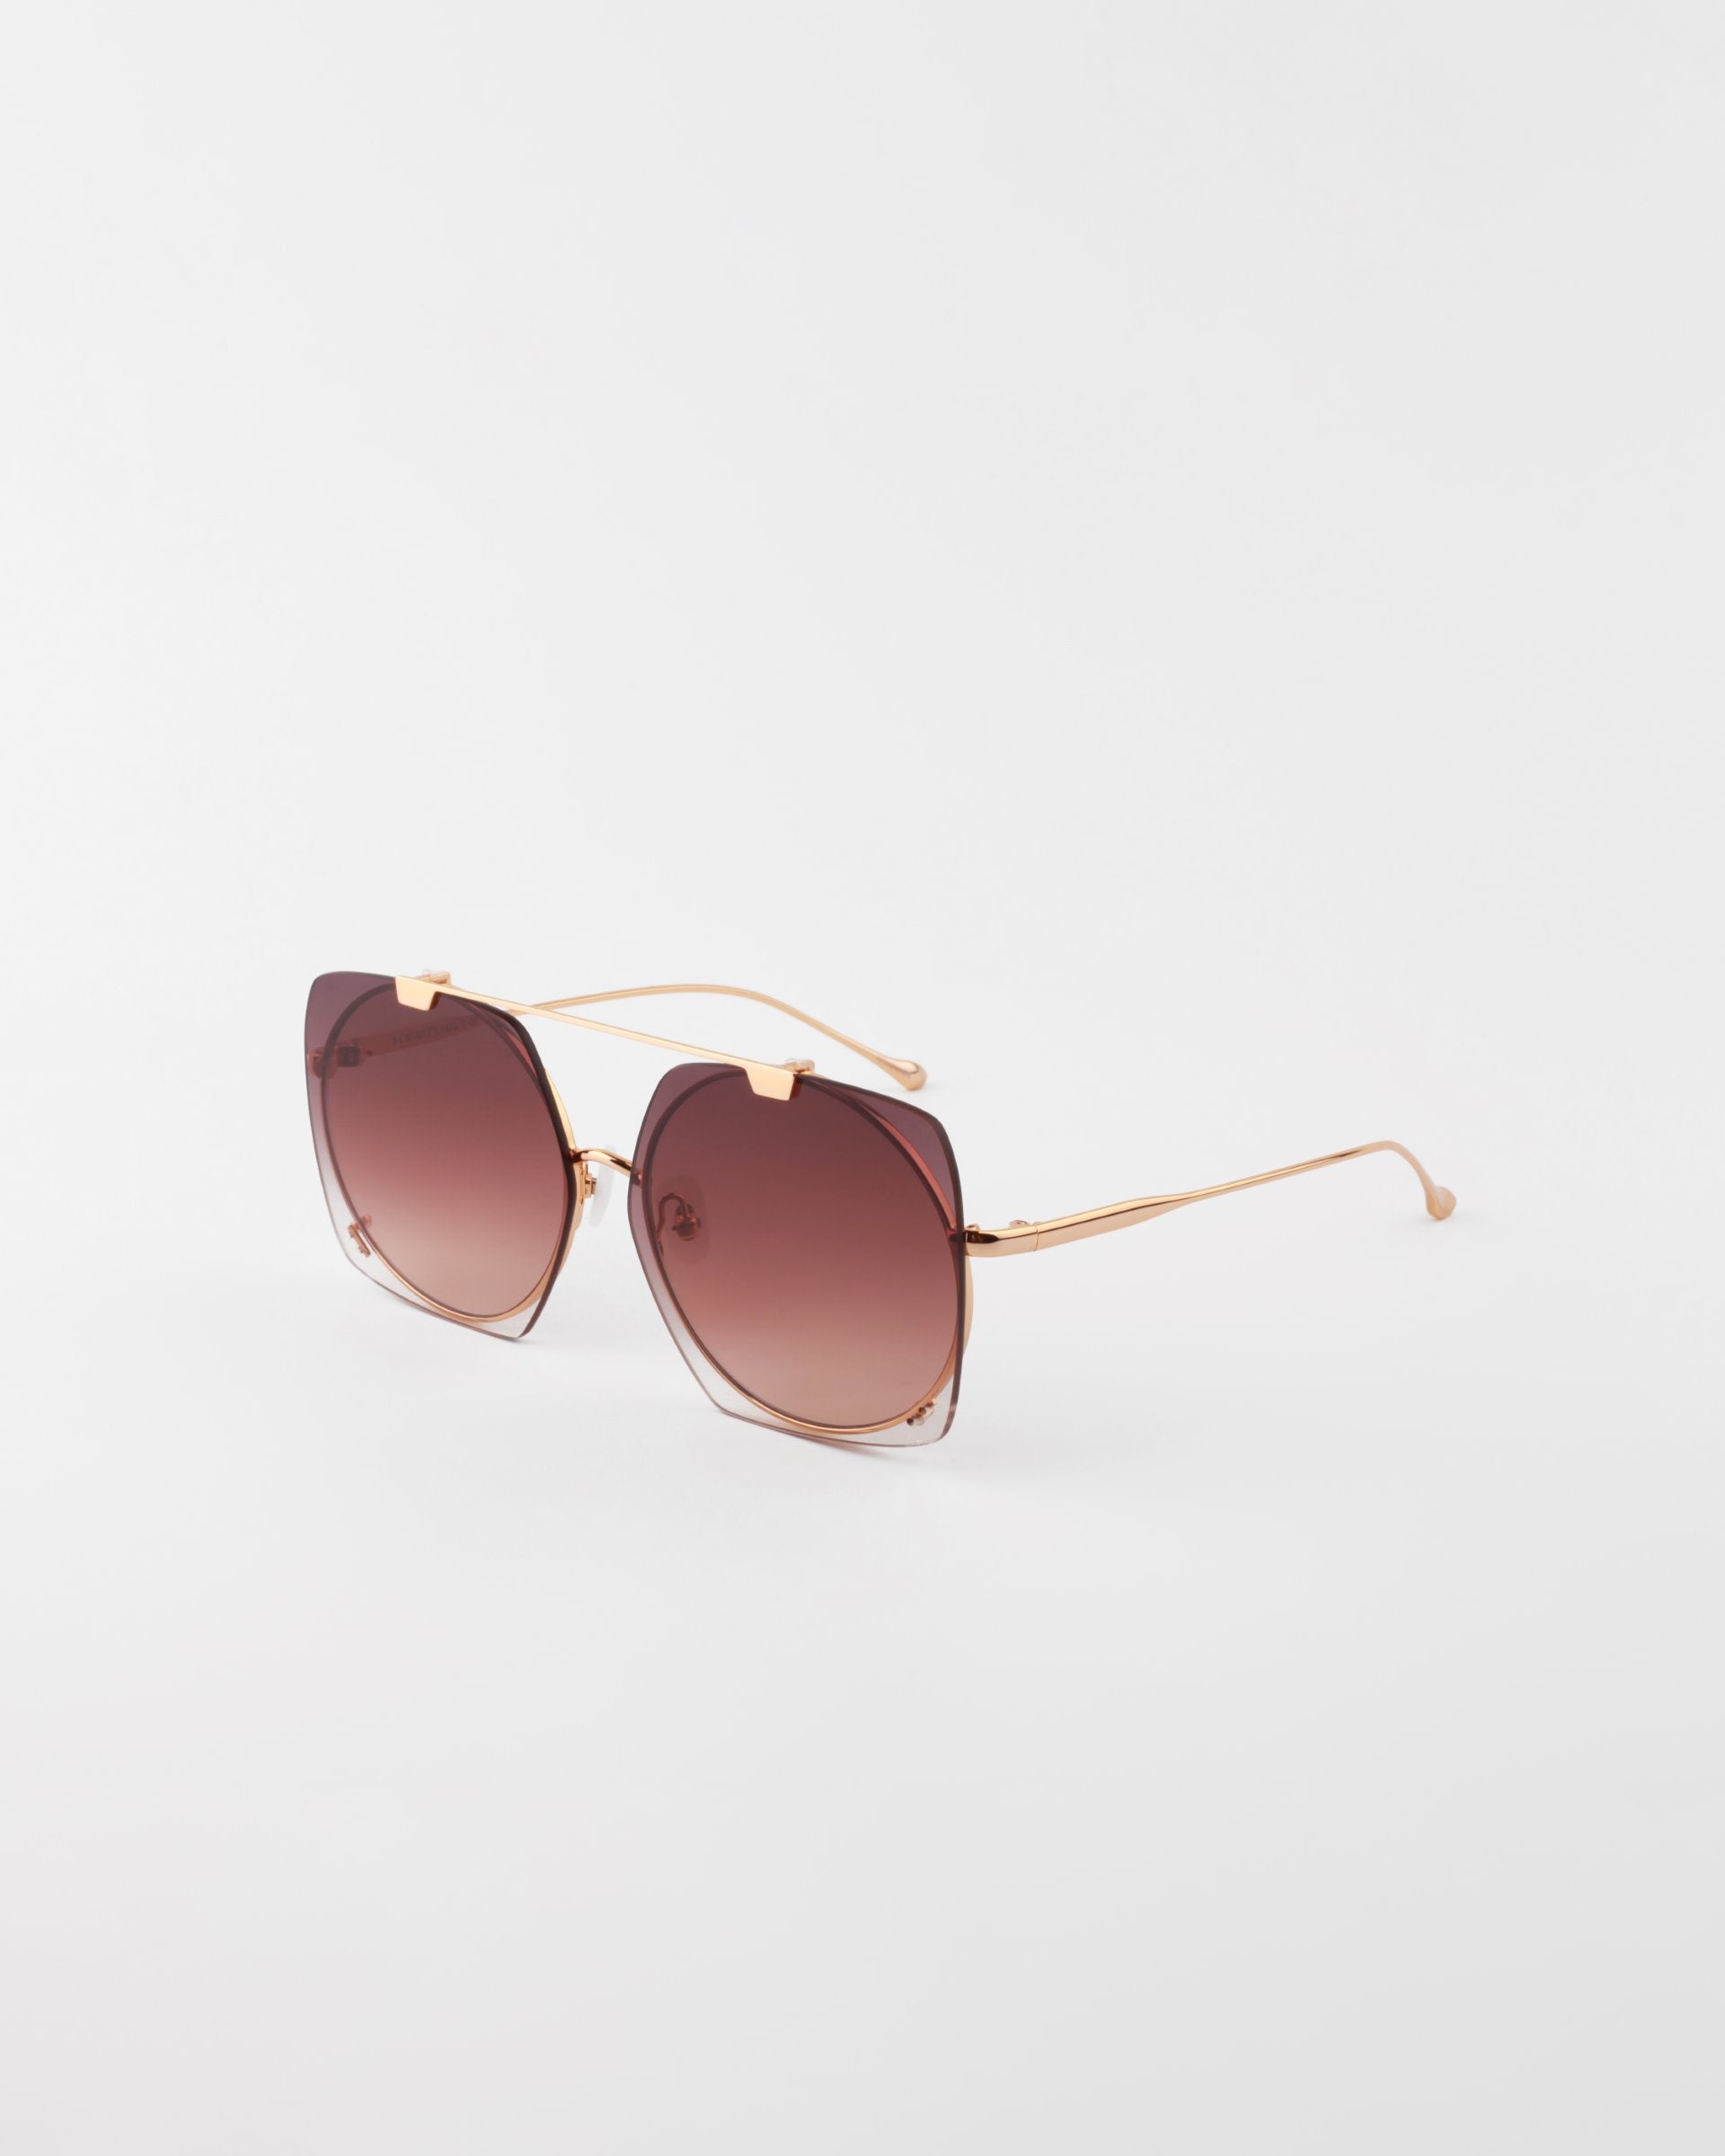 A pair of fashionable Last Summer sunglasses by For Art&#39;s Sake® with gradient brown lenses and thin, 18-karat gold-plated frames sits on a white surface. The sunglasses feature a stylish, square shape with gently curved edges and elegant, slender arms extending from the UVA &amp; UVB-protected frames.